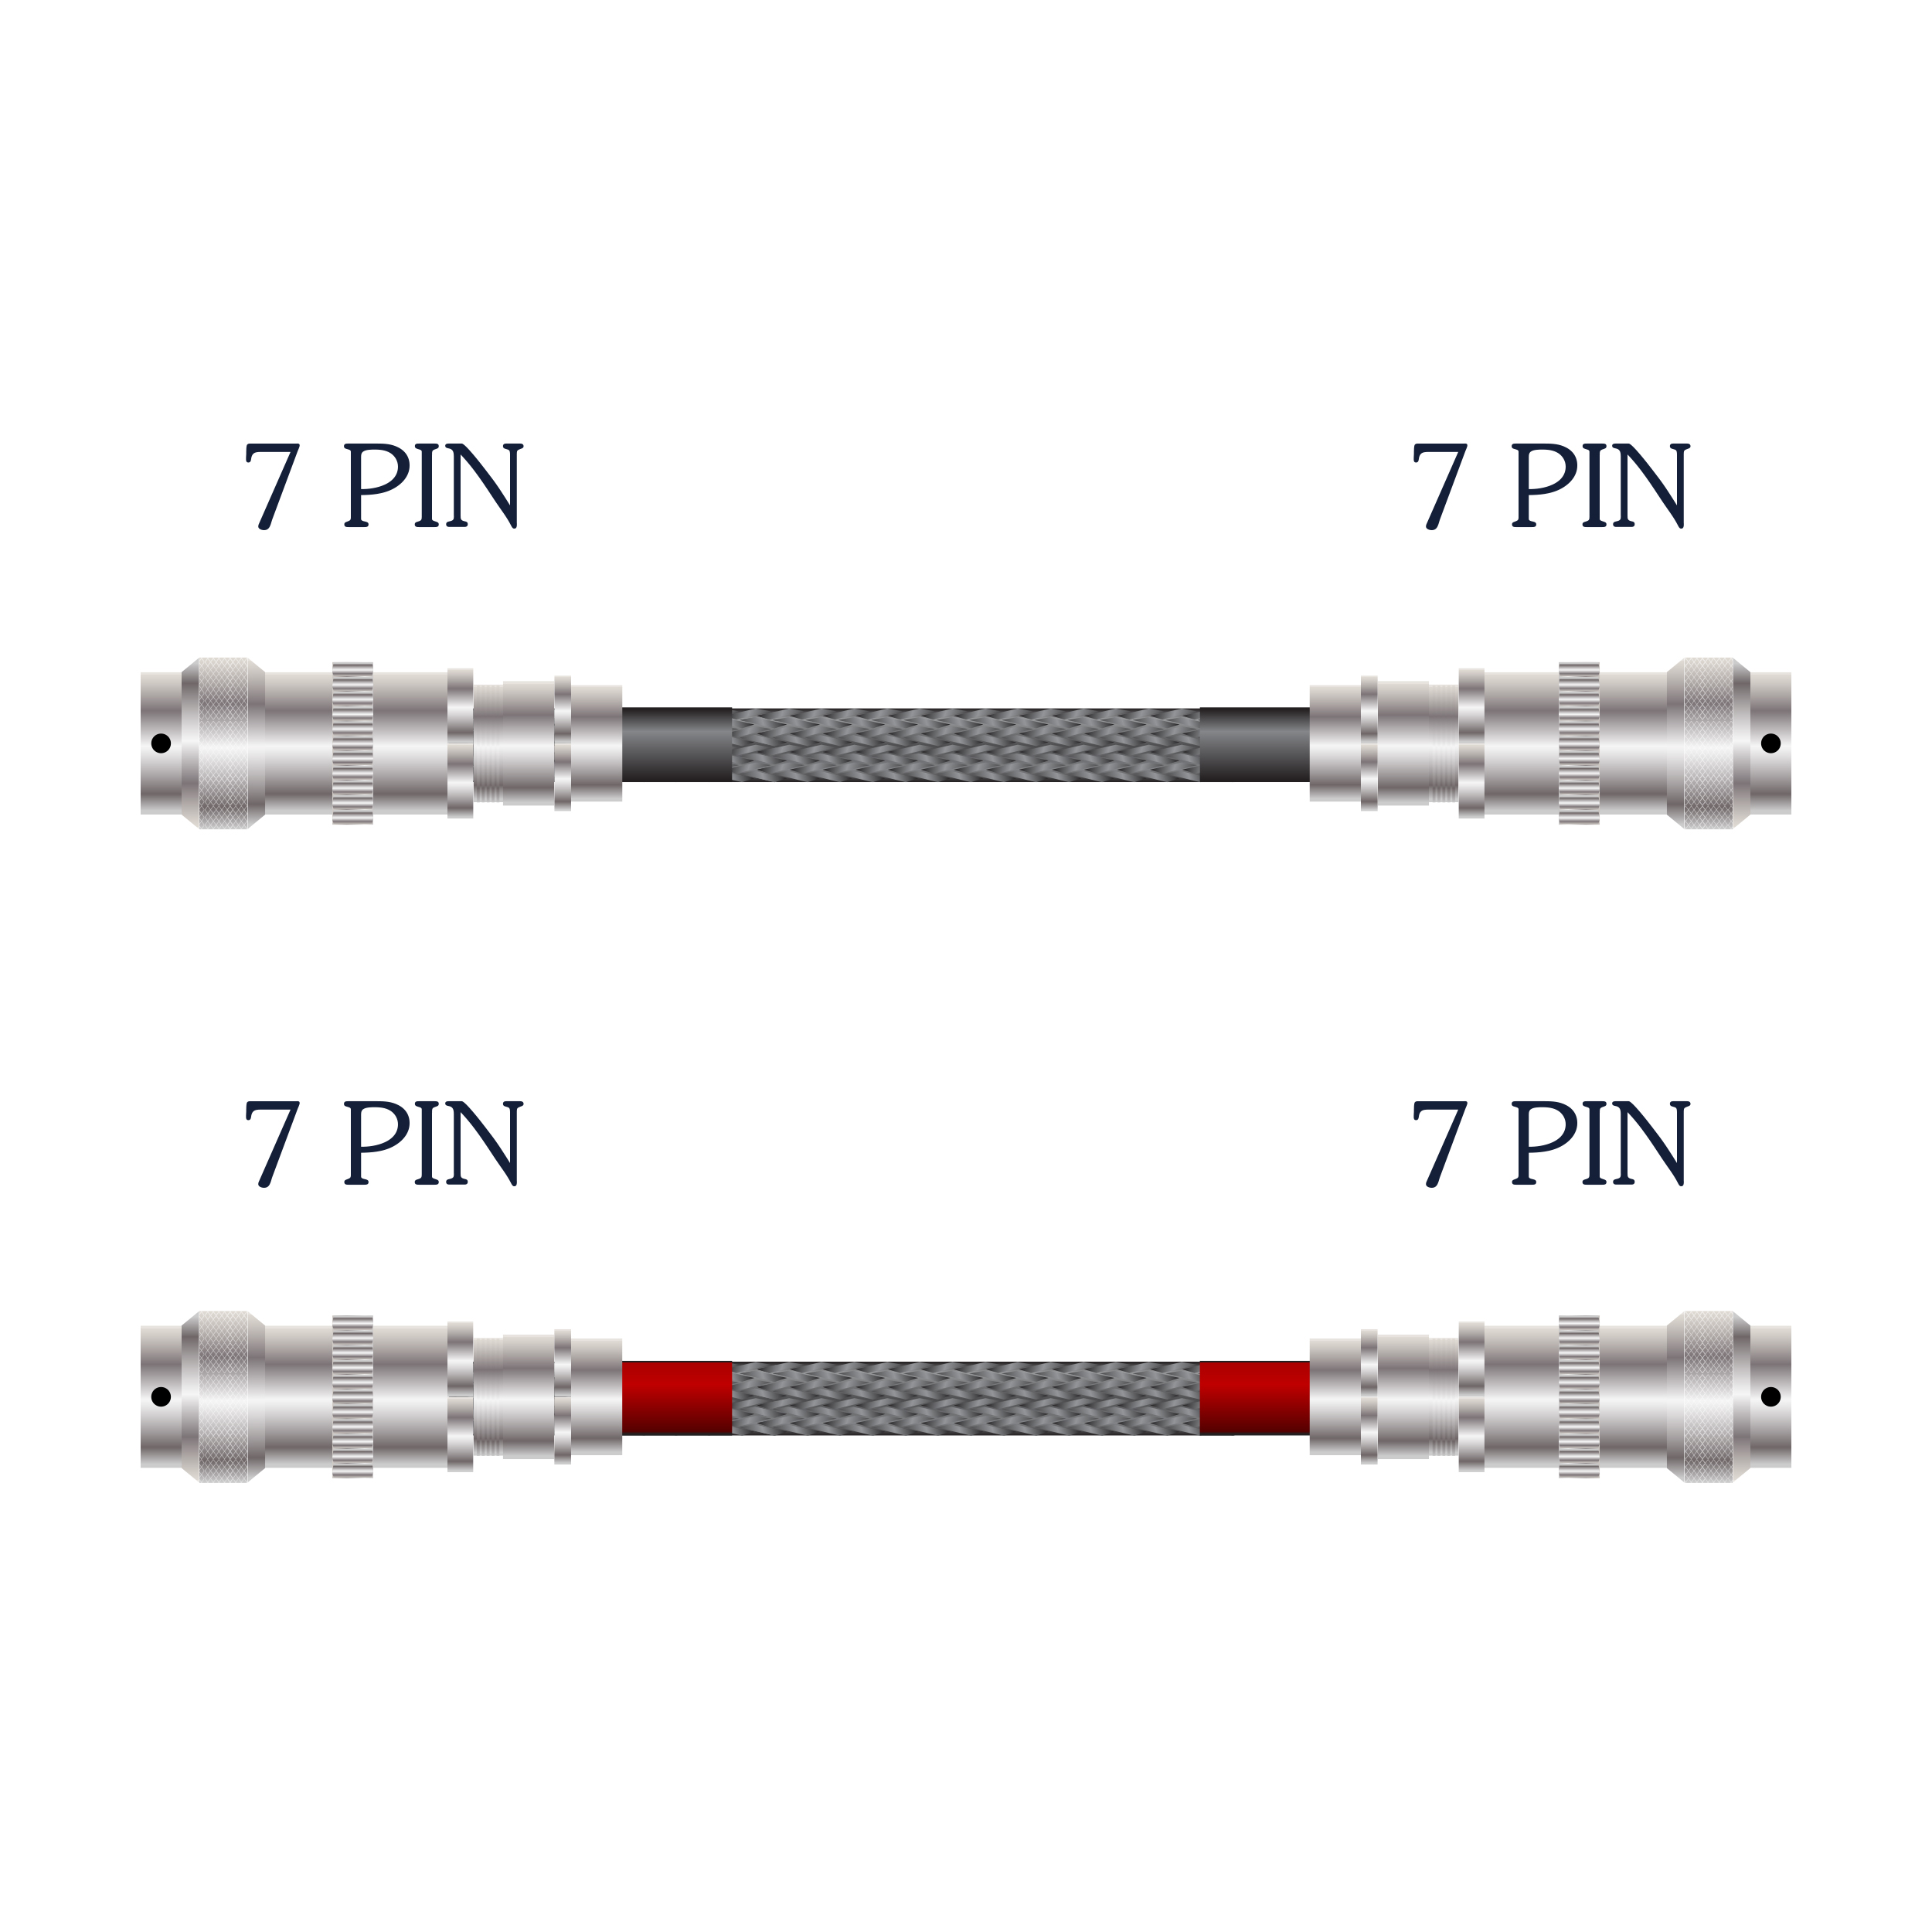 <p align="center">Tyr 2 Specialty 7 Pin / 7 Pin Cable Pair Cable</p>